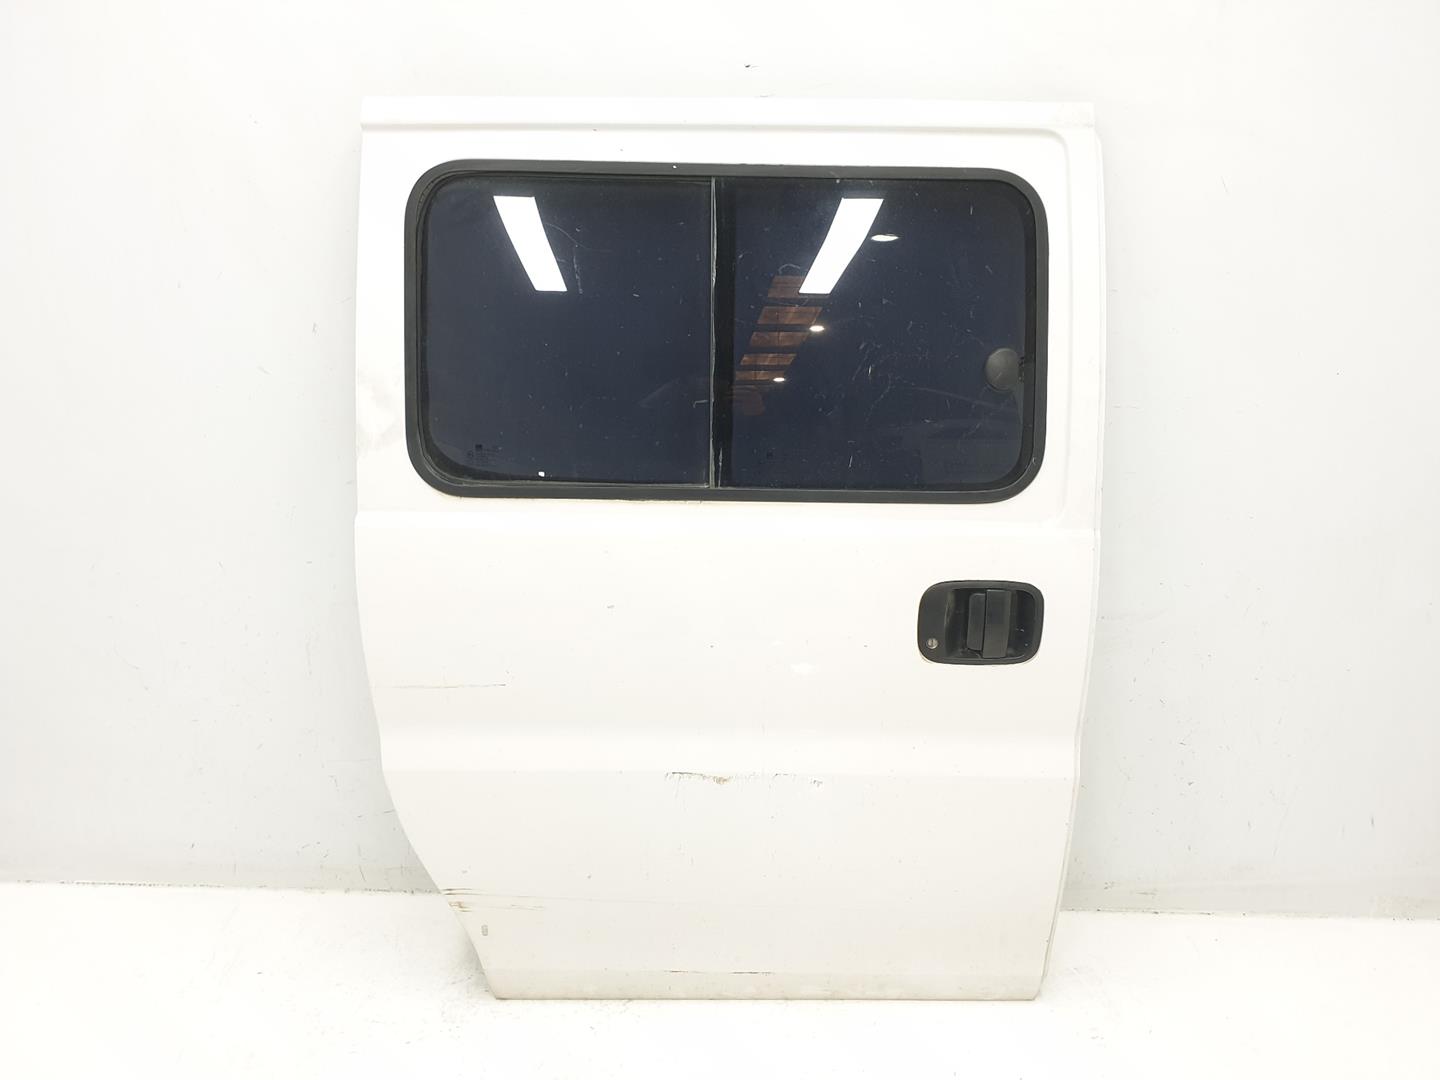 HYUNDAI H-1 Starex (1997-2007) Right Side Sliding Door 770024A720, 770024A720, COLORBLANCOWISHWW 24551774